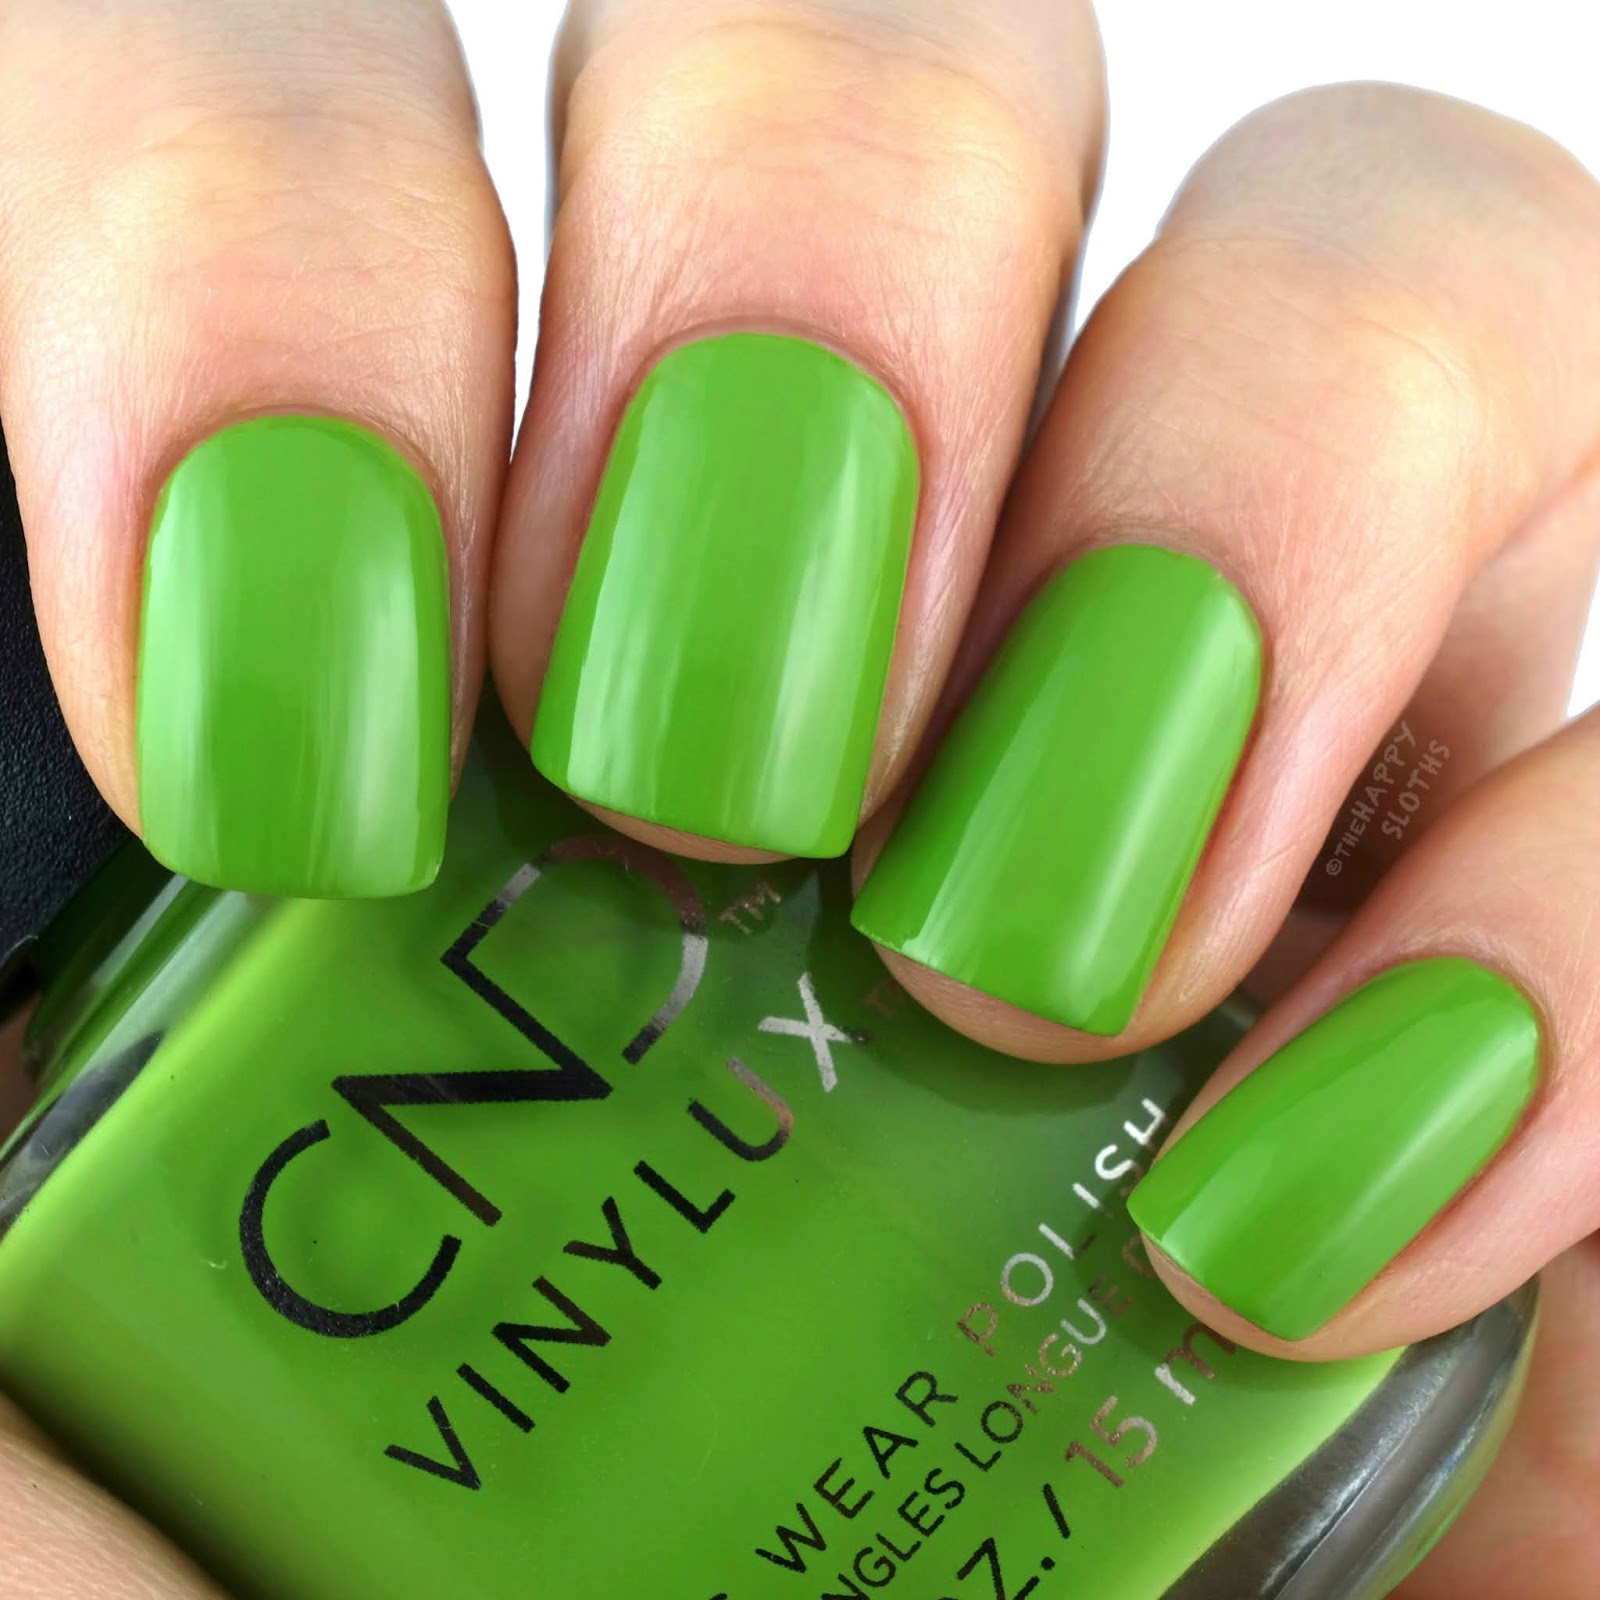 CND | Fall 2020 Autumn Addict Collection | Crisp Green: Review and Swatches